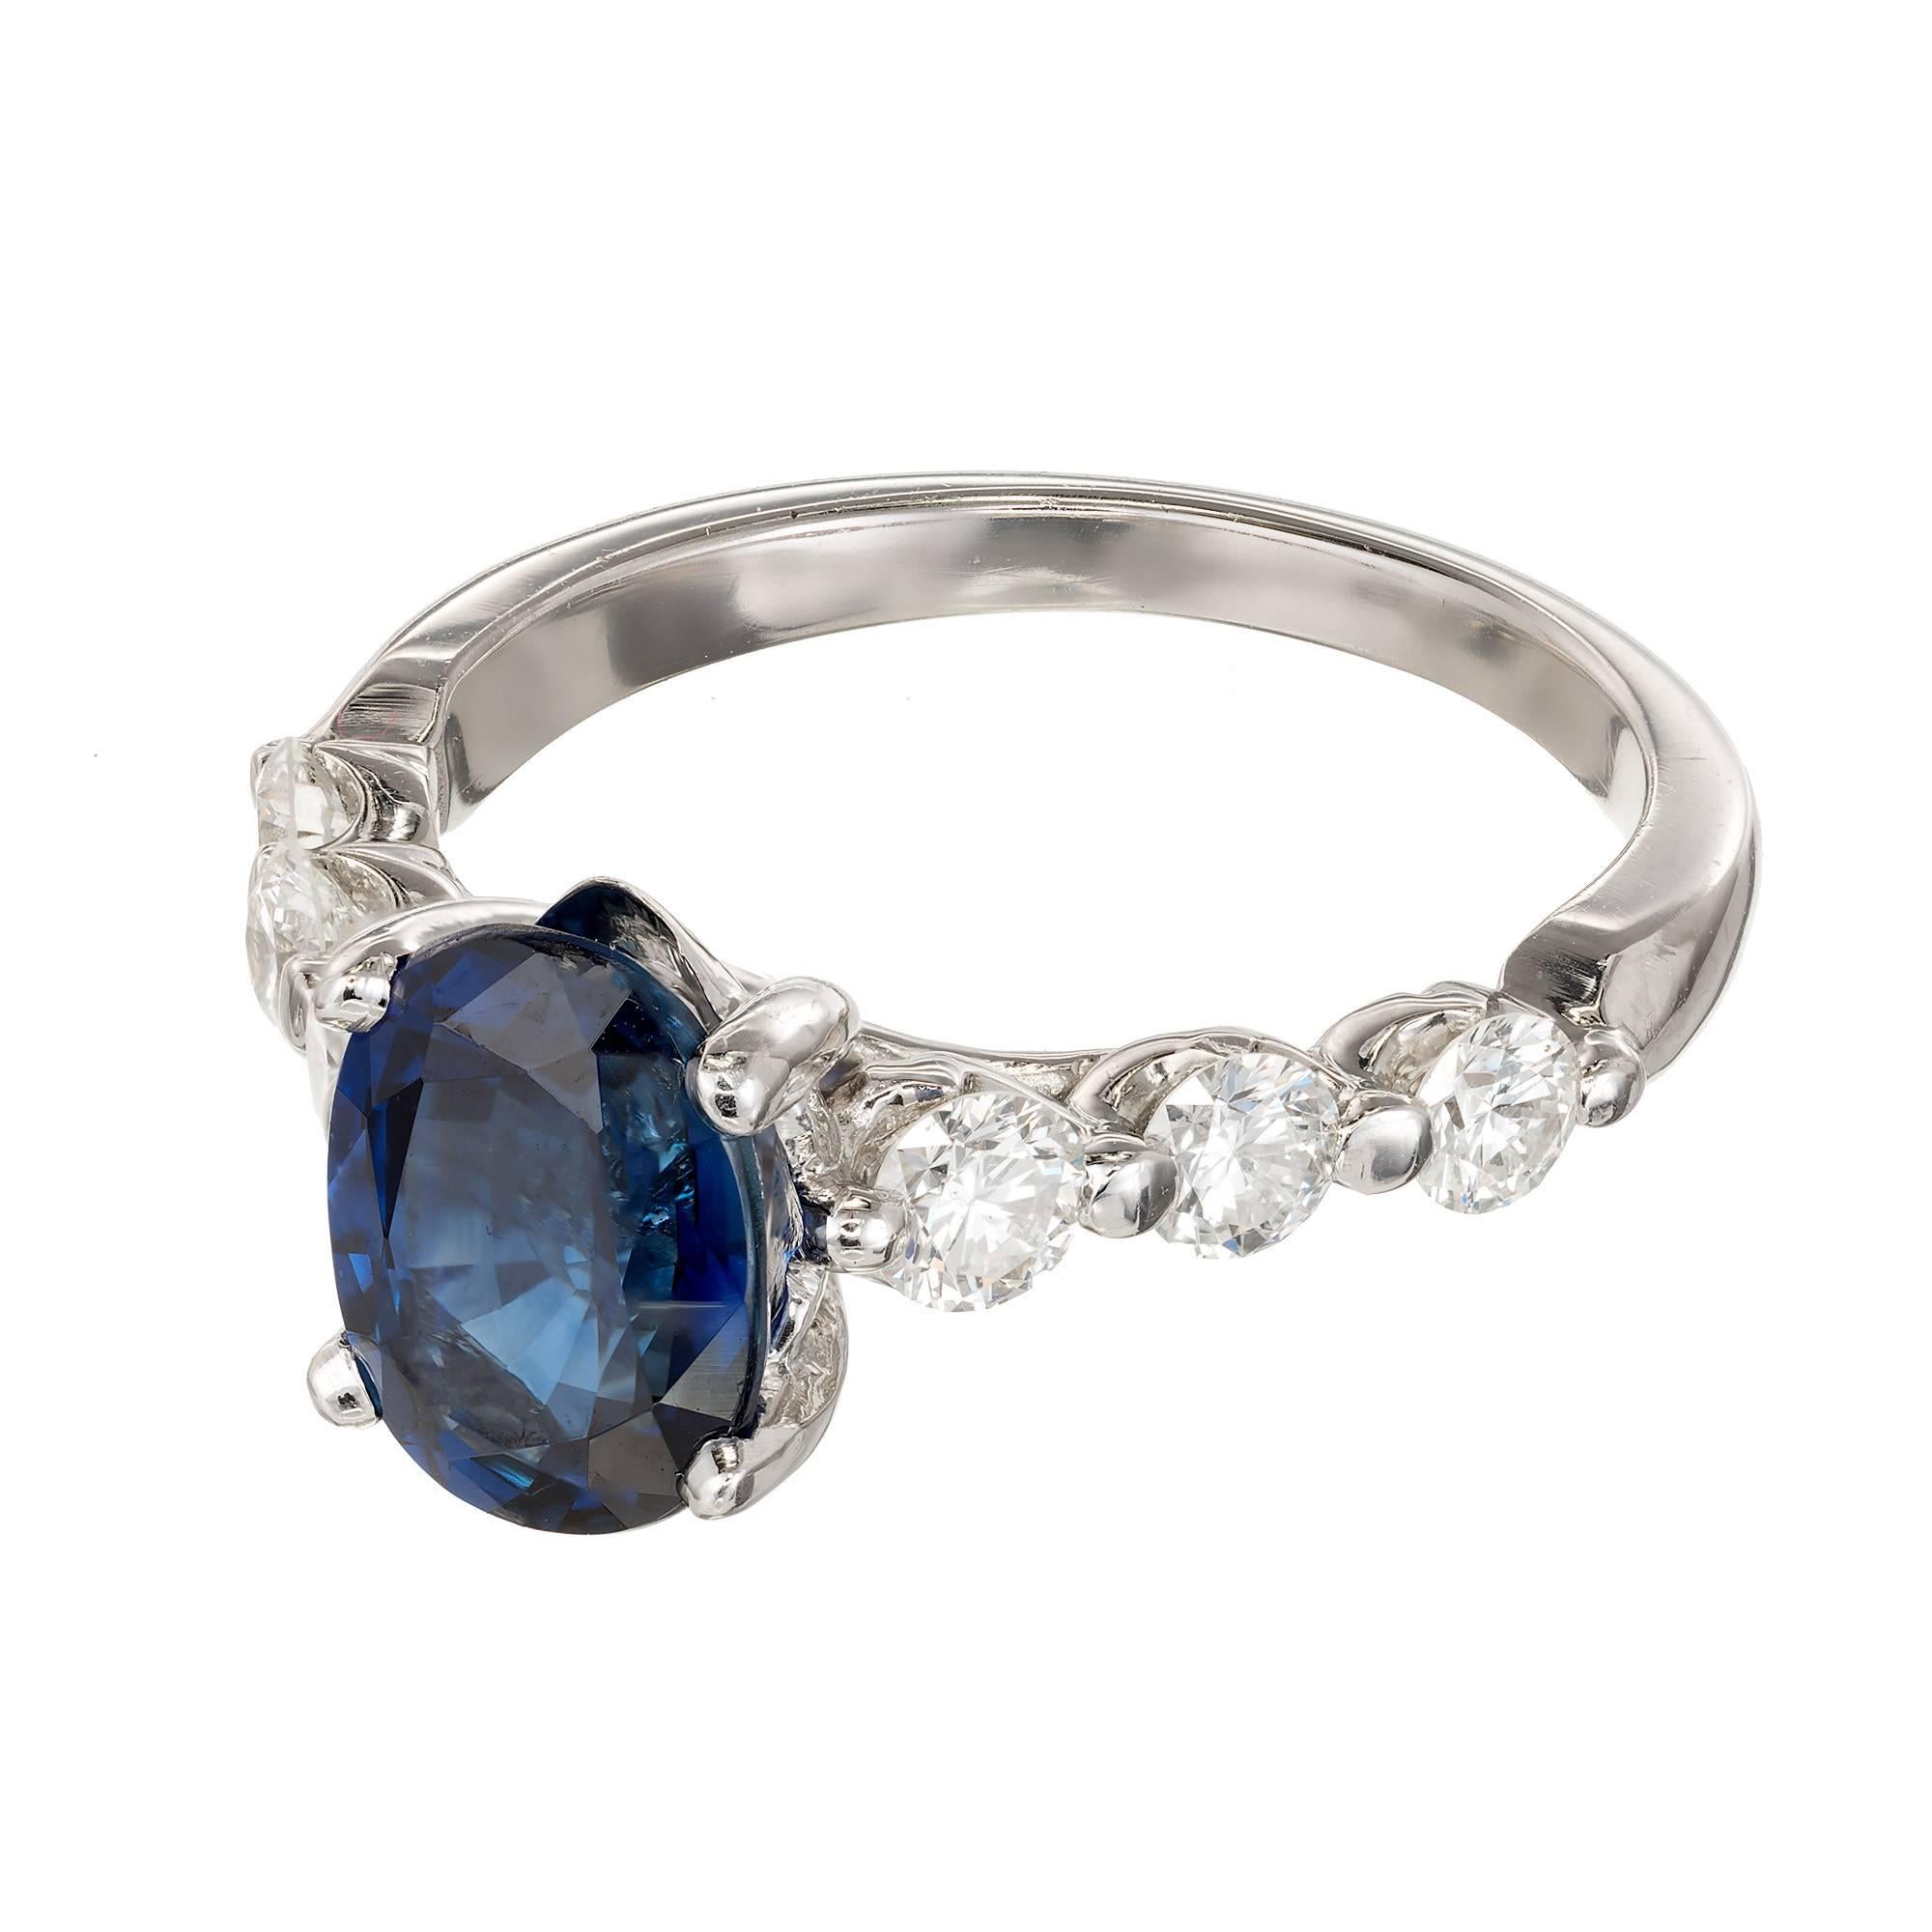 Oval Cut Peter Suchy GIA 2.27 Carat Blue Oval Sapphire Diamond Platinum Engagement Ring